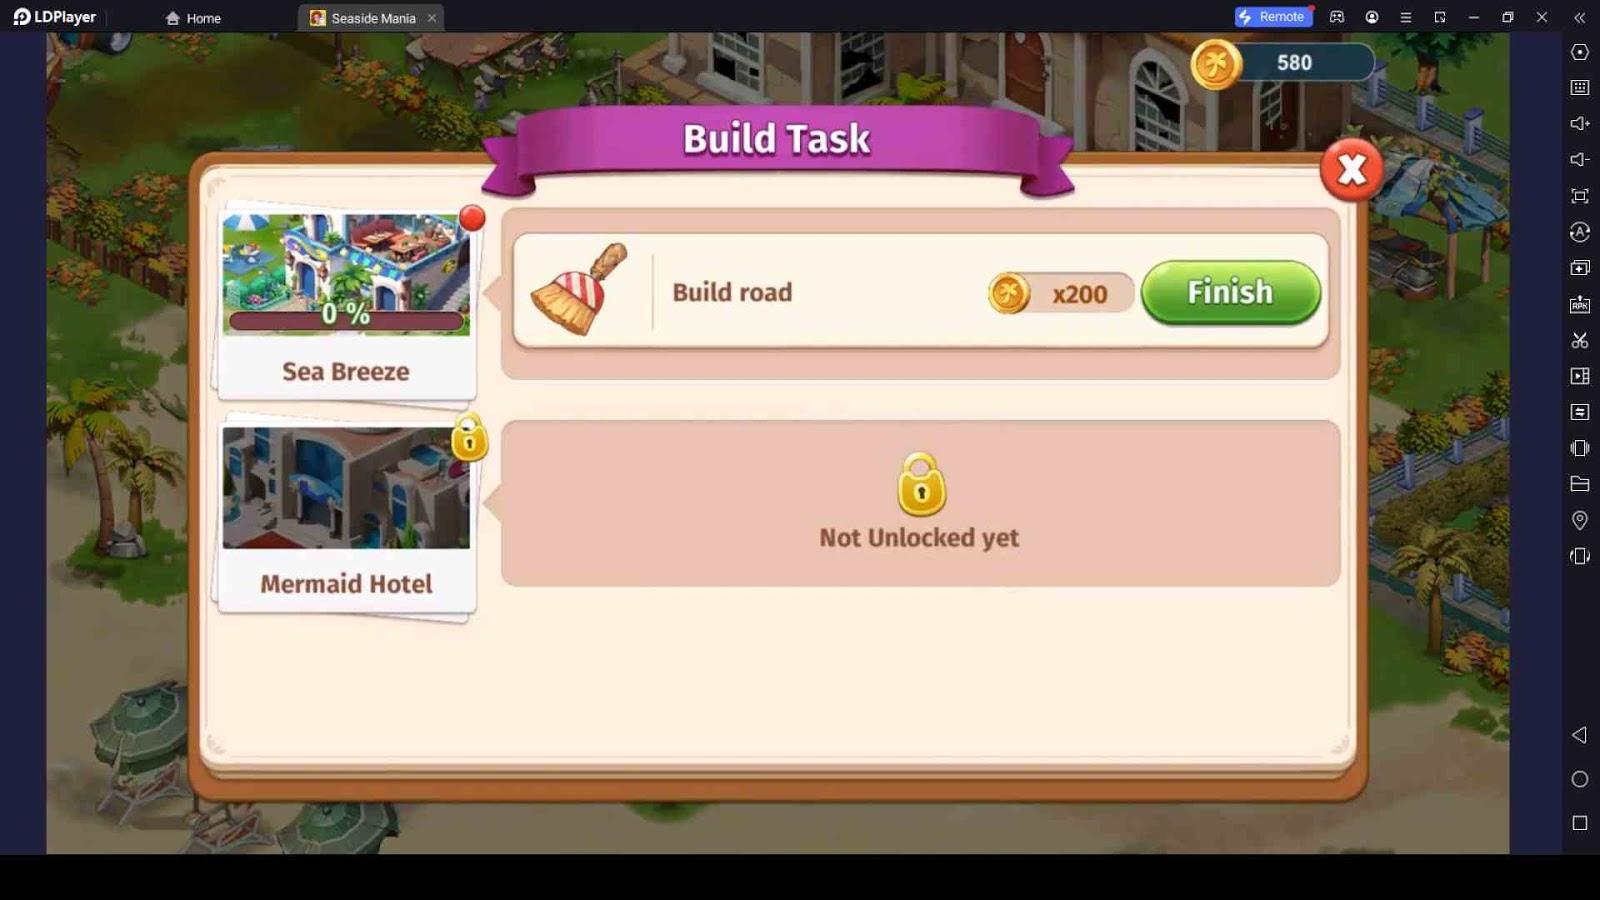 Earn More Coins to Renovate and Build More